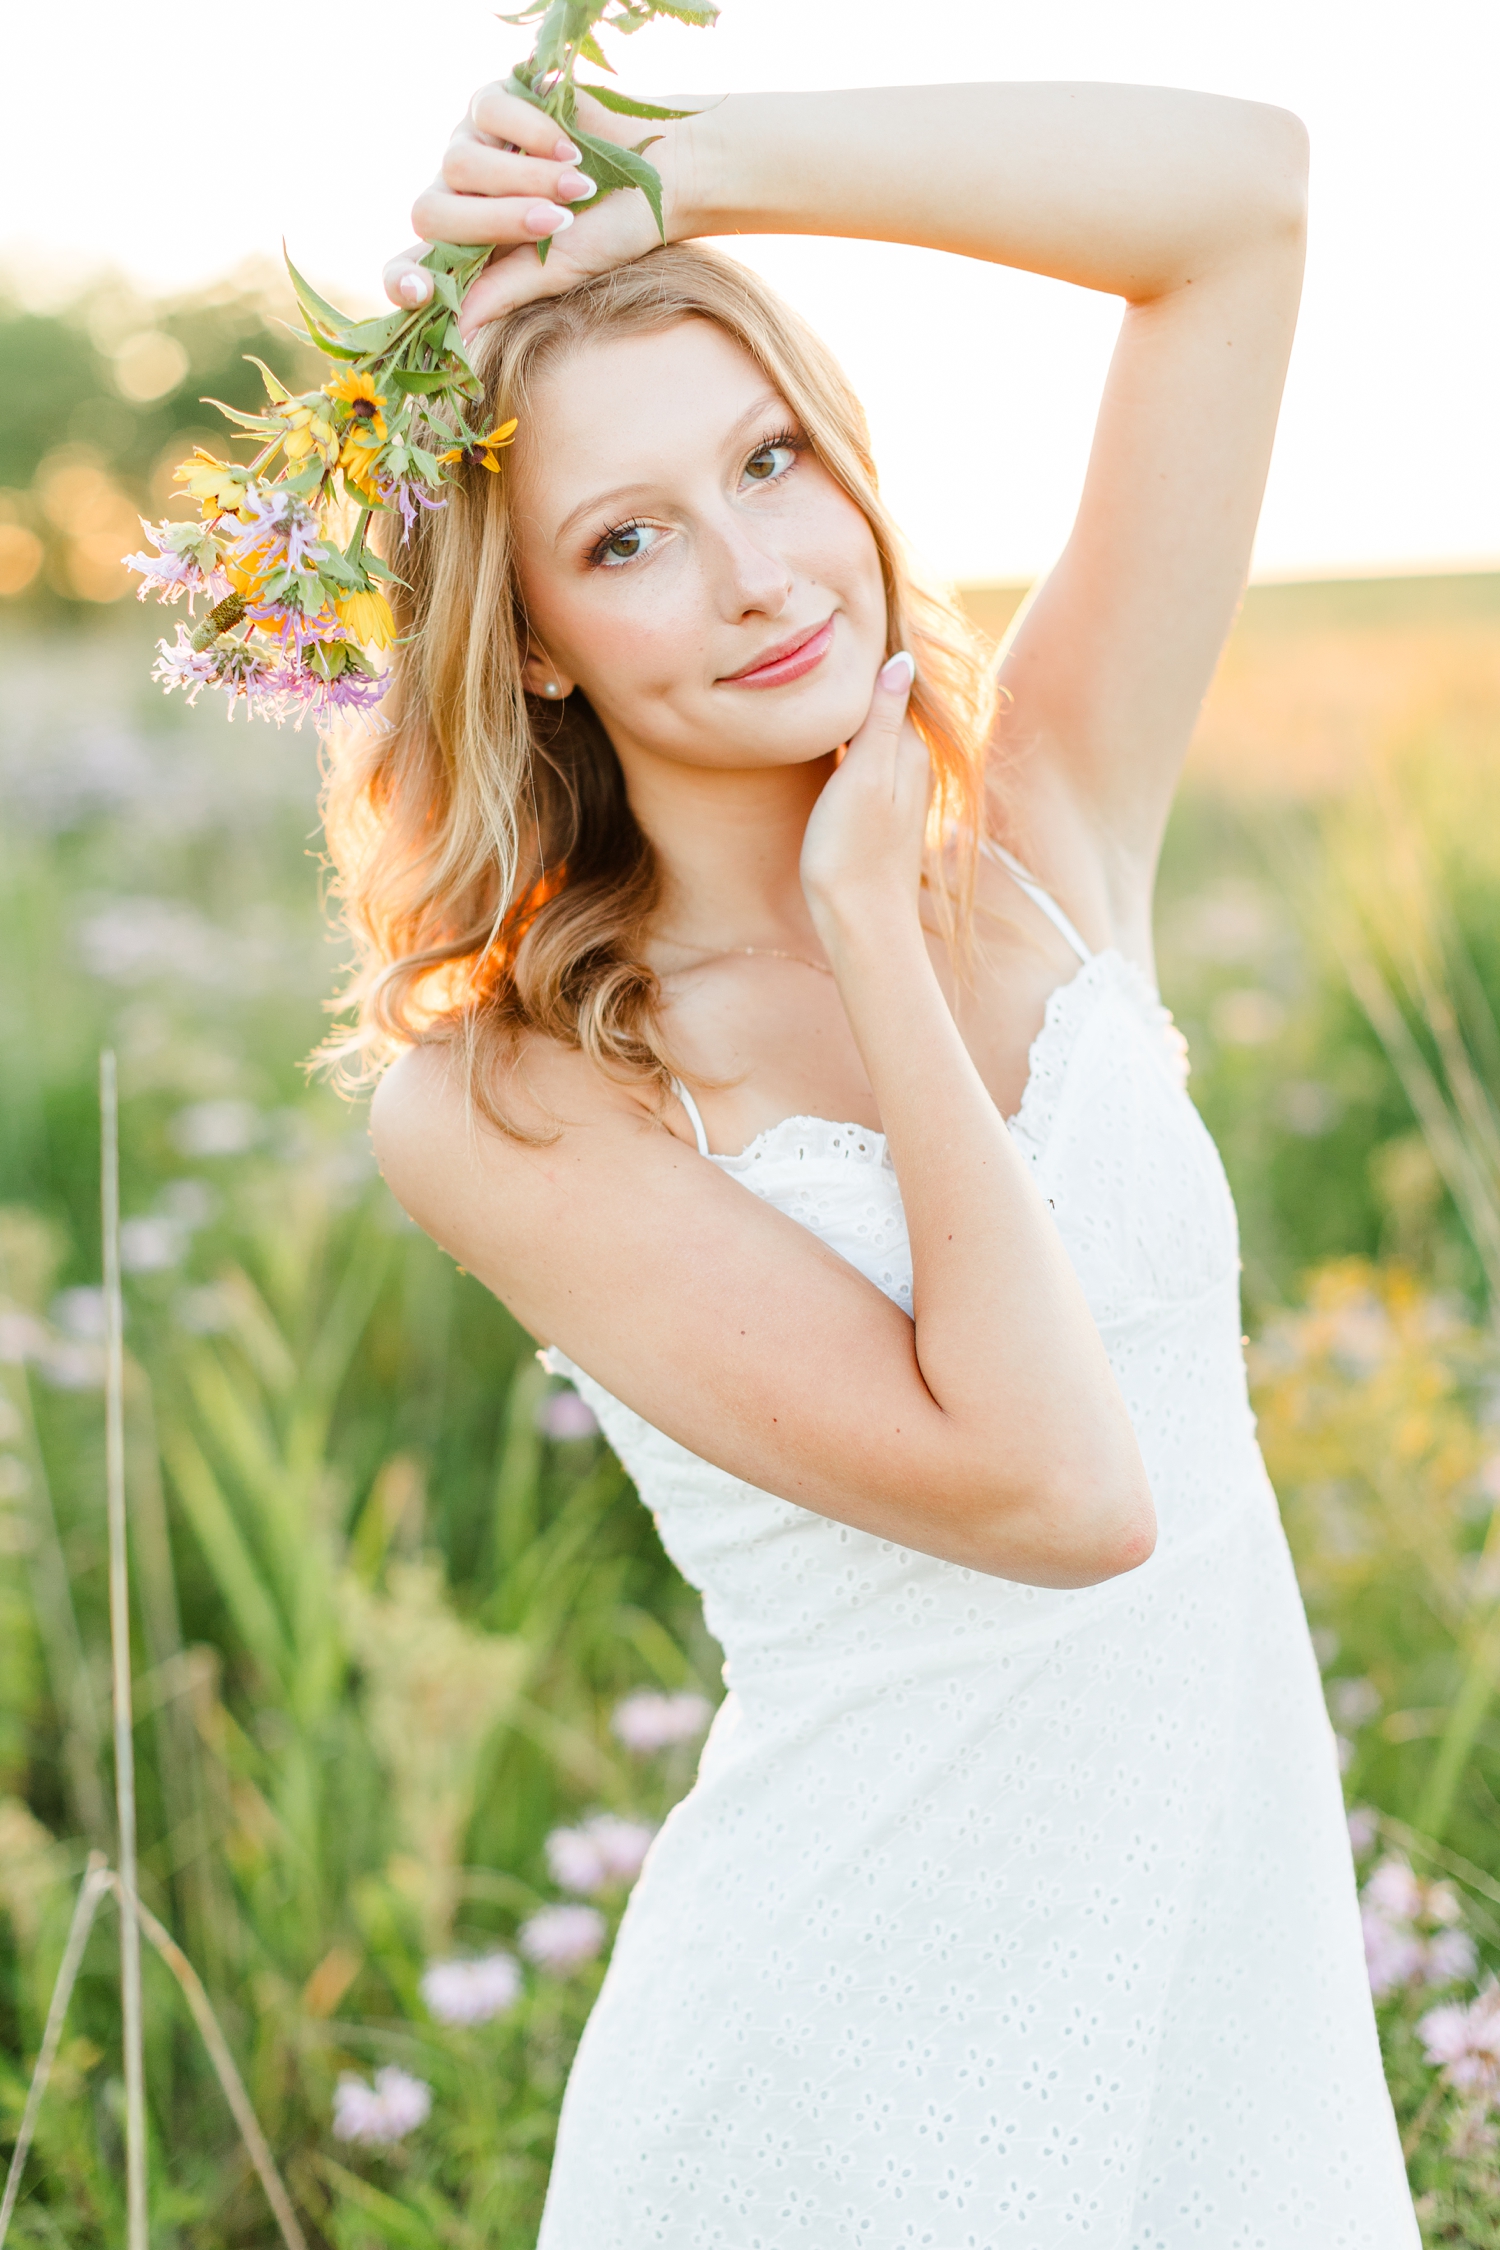 Ryley holds a small bouquet of wildflowers above her head and cups her cheek as she stands in a flower filed at sunset | CB Studio